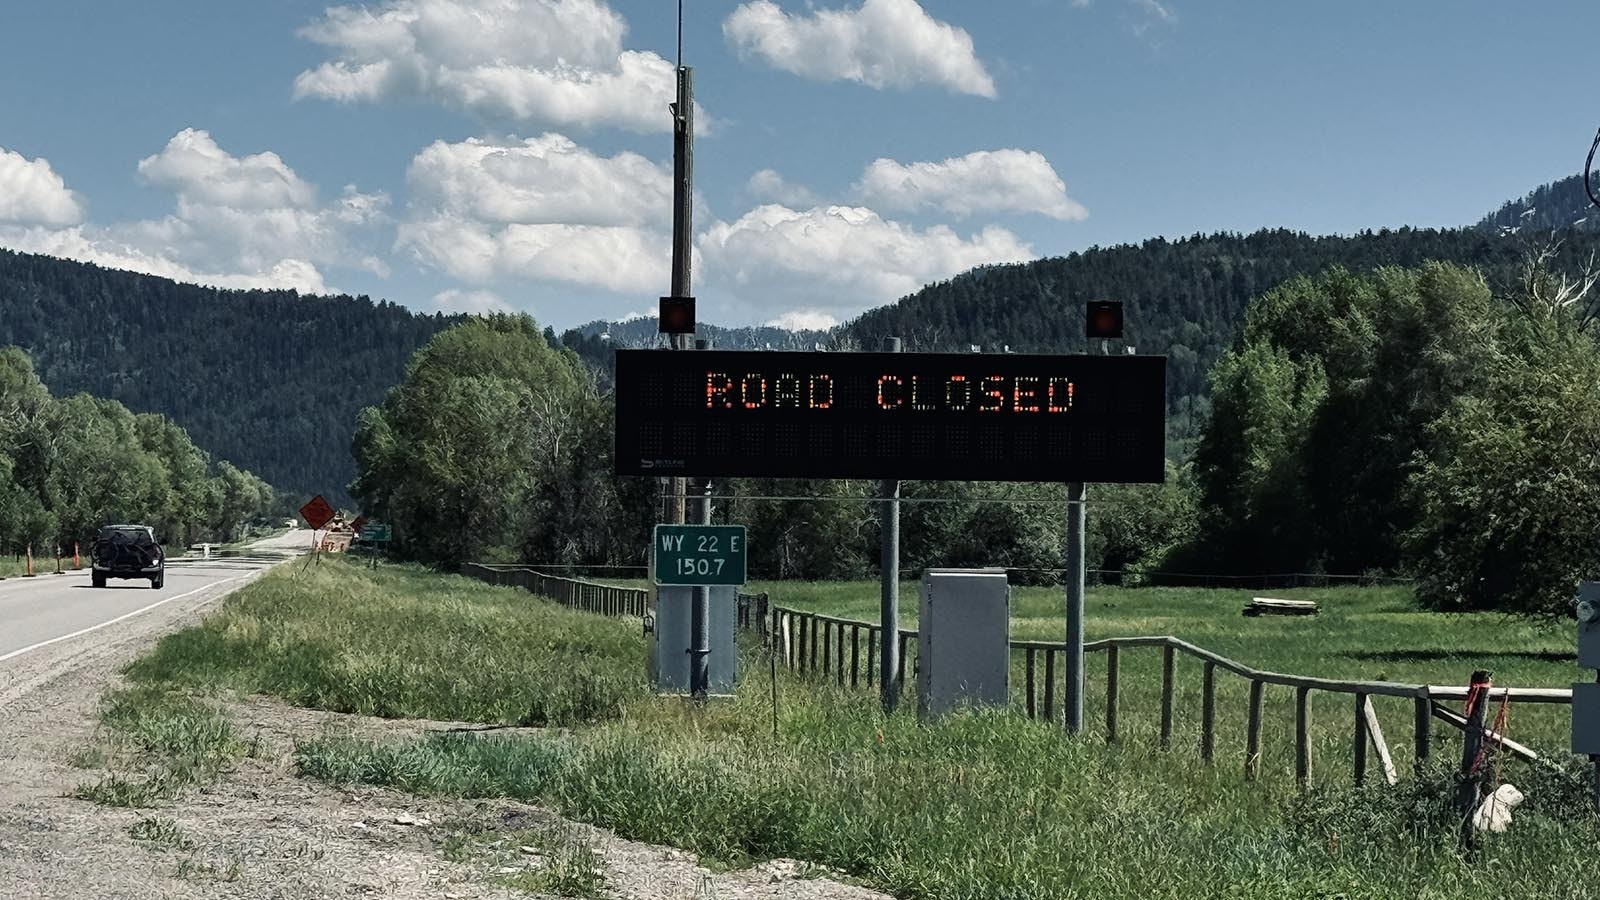 A Wyoming Department of Transportation sign warns drivers to stop at the Wyoming and Idaho border due to the landslide that crippled Wyoming State Route 22 through the Teton Pass.